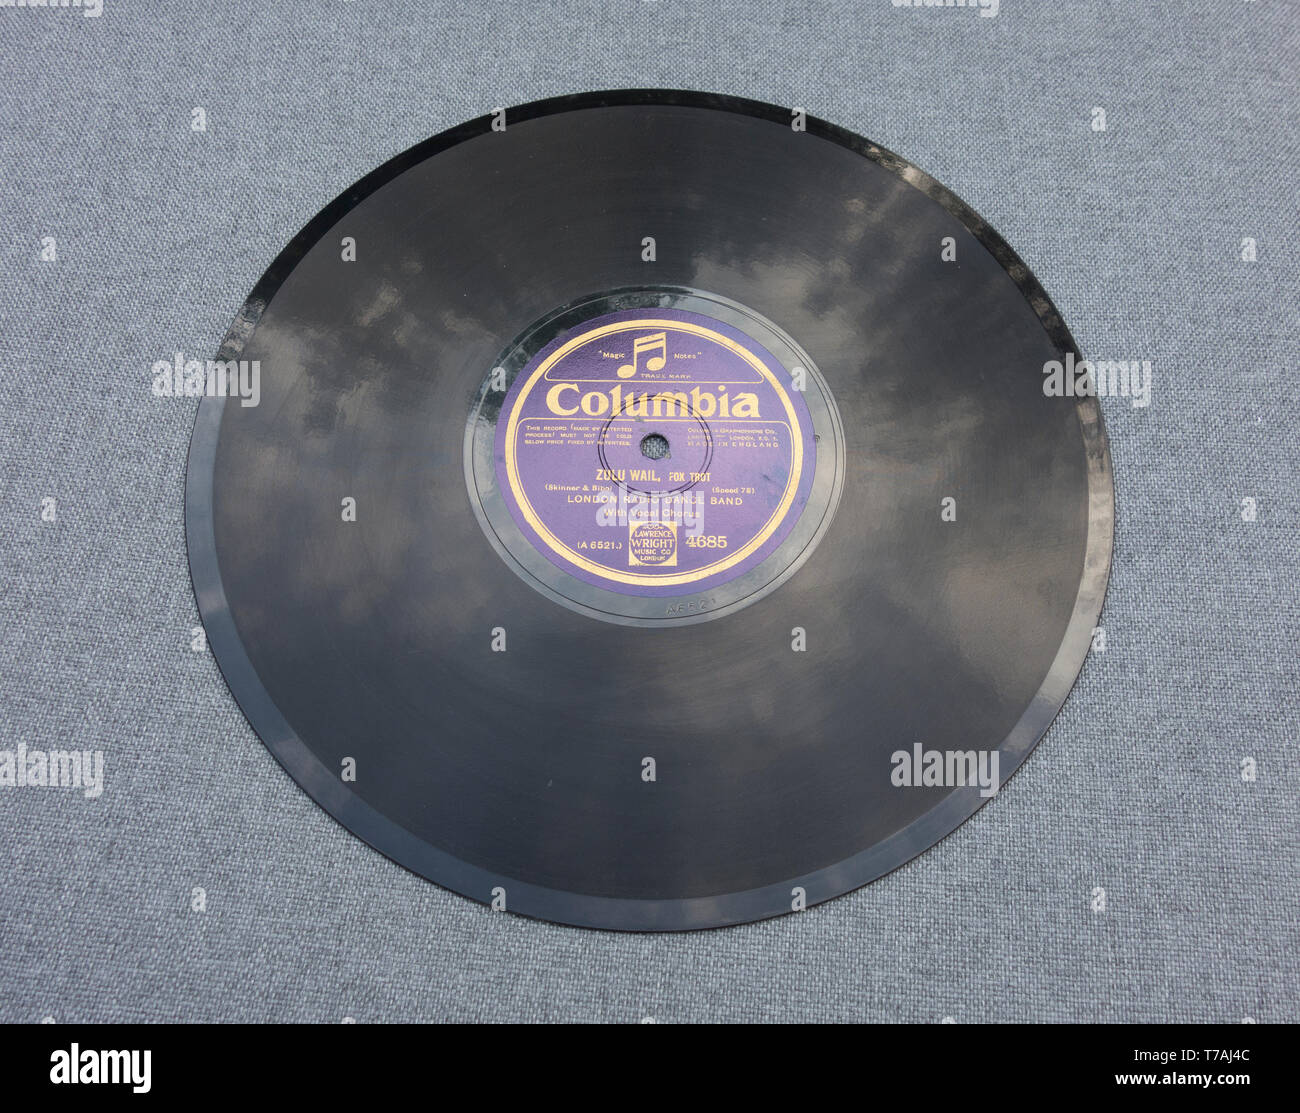 Columbia Gramophone Company record label with Zulu Wall, Fox Trot with the London Radio Dance Band on an old 78-rpm record Stock Photo